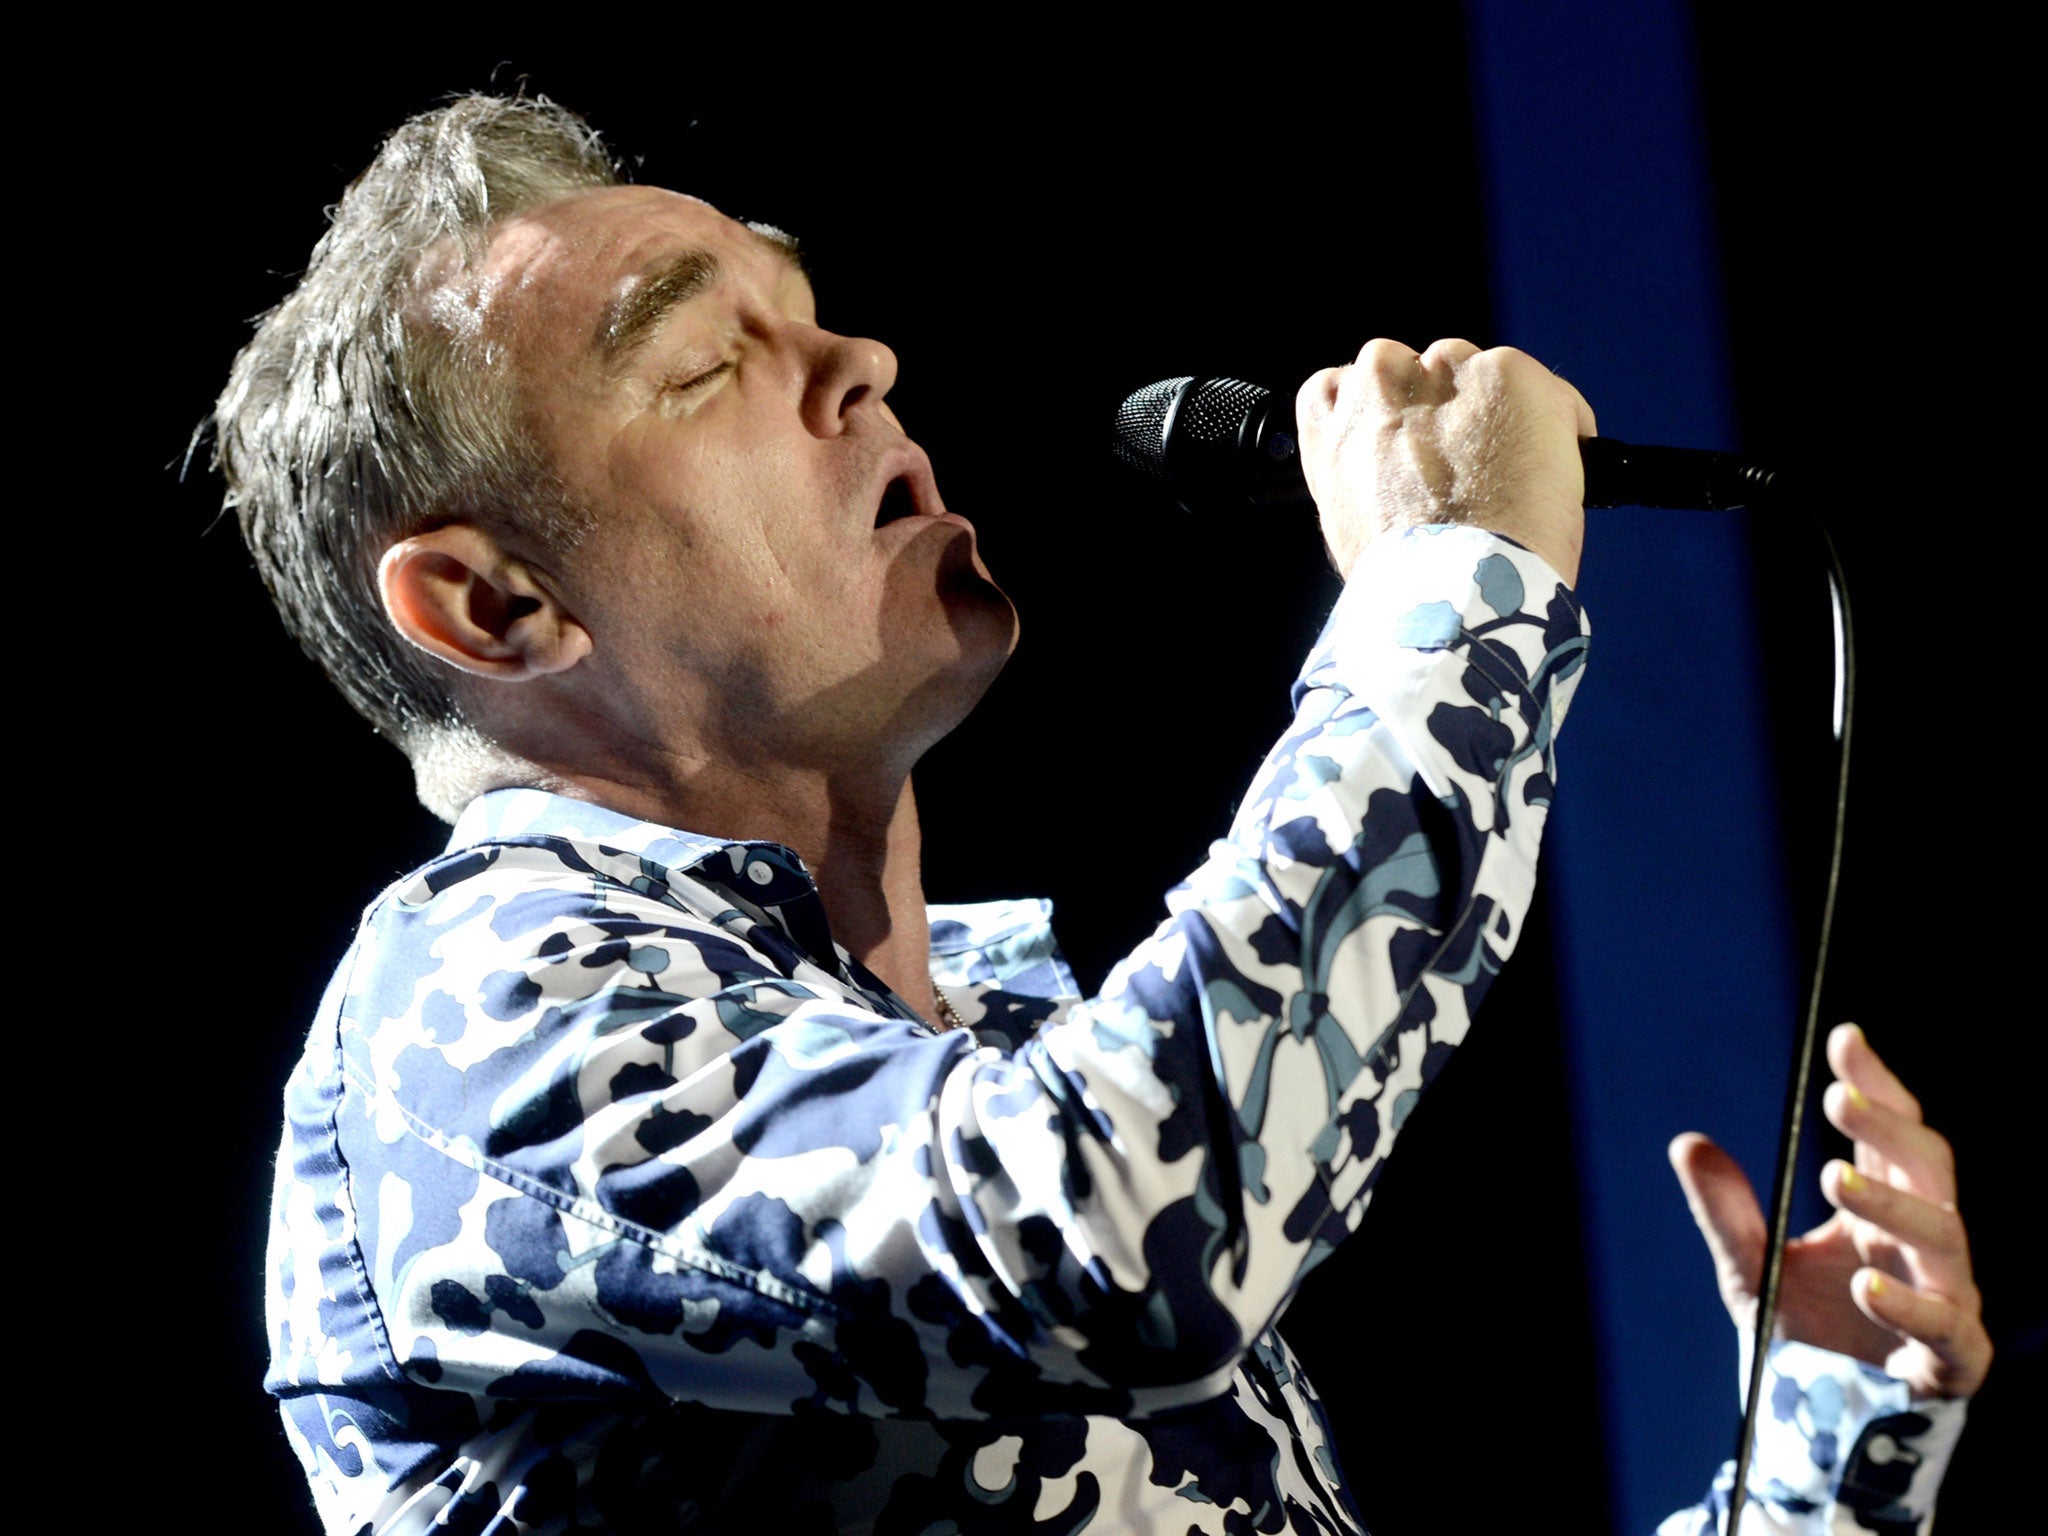 Smiths frontman Morrissey said he is midway through writing a novel